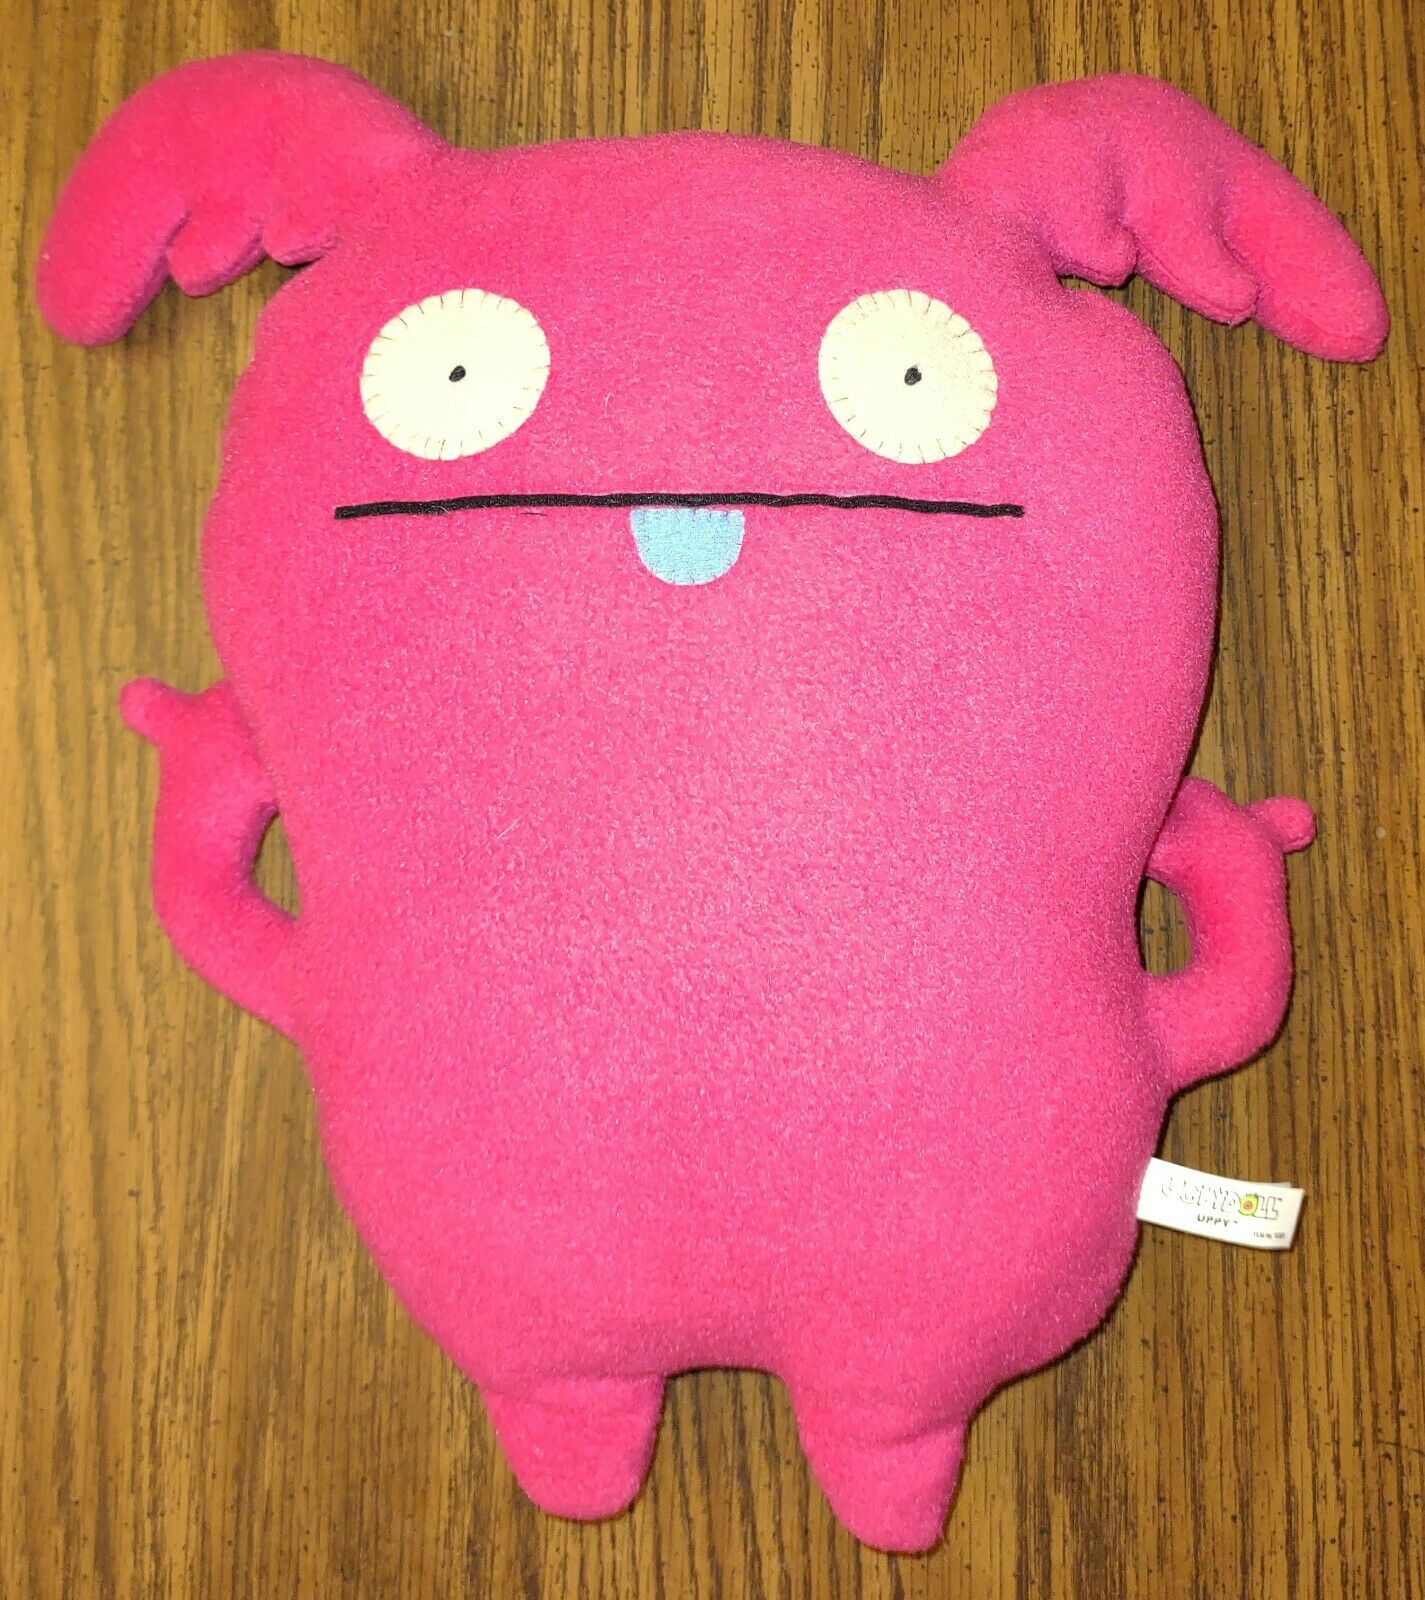 Uglydoll Ugly Pink Doll Uppy Pillow Stuffed Animal Plush Toy